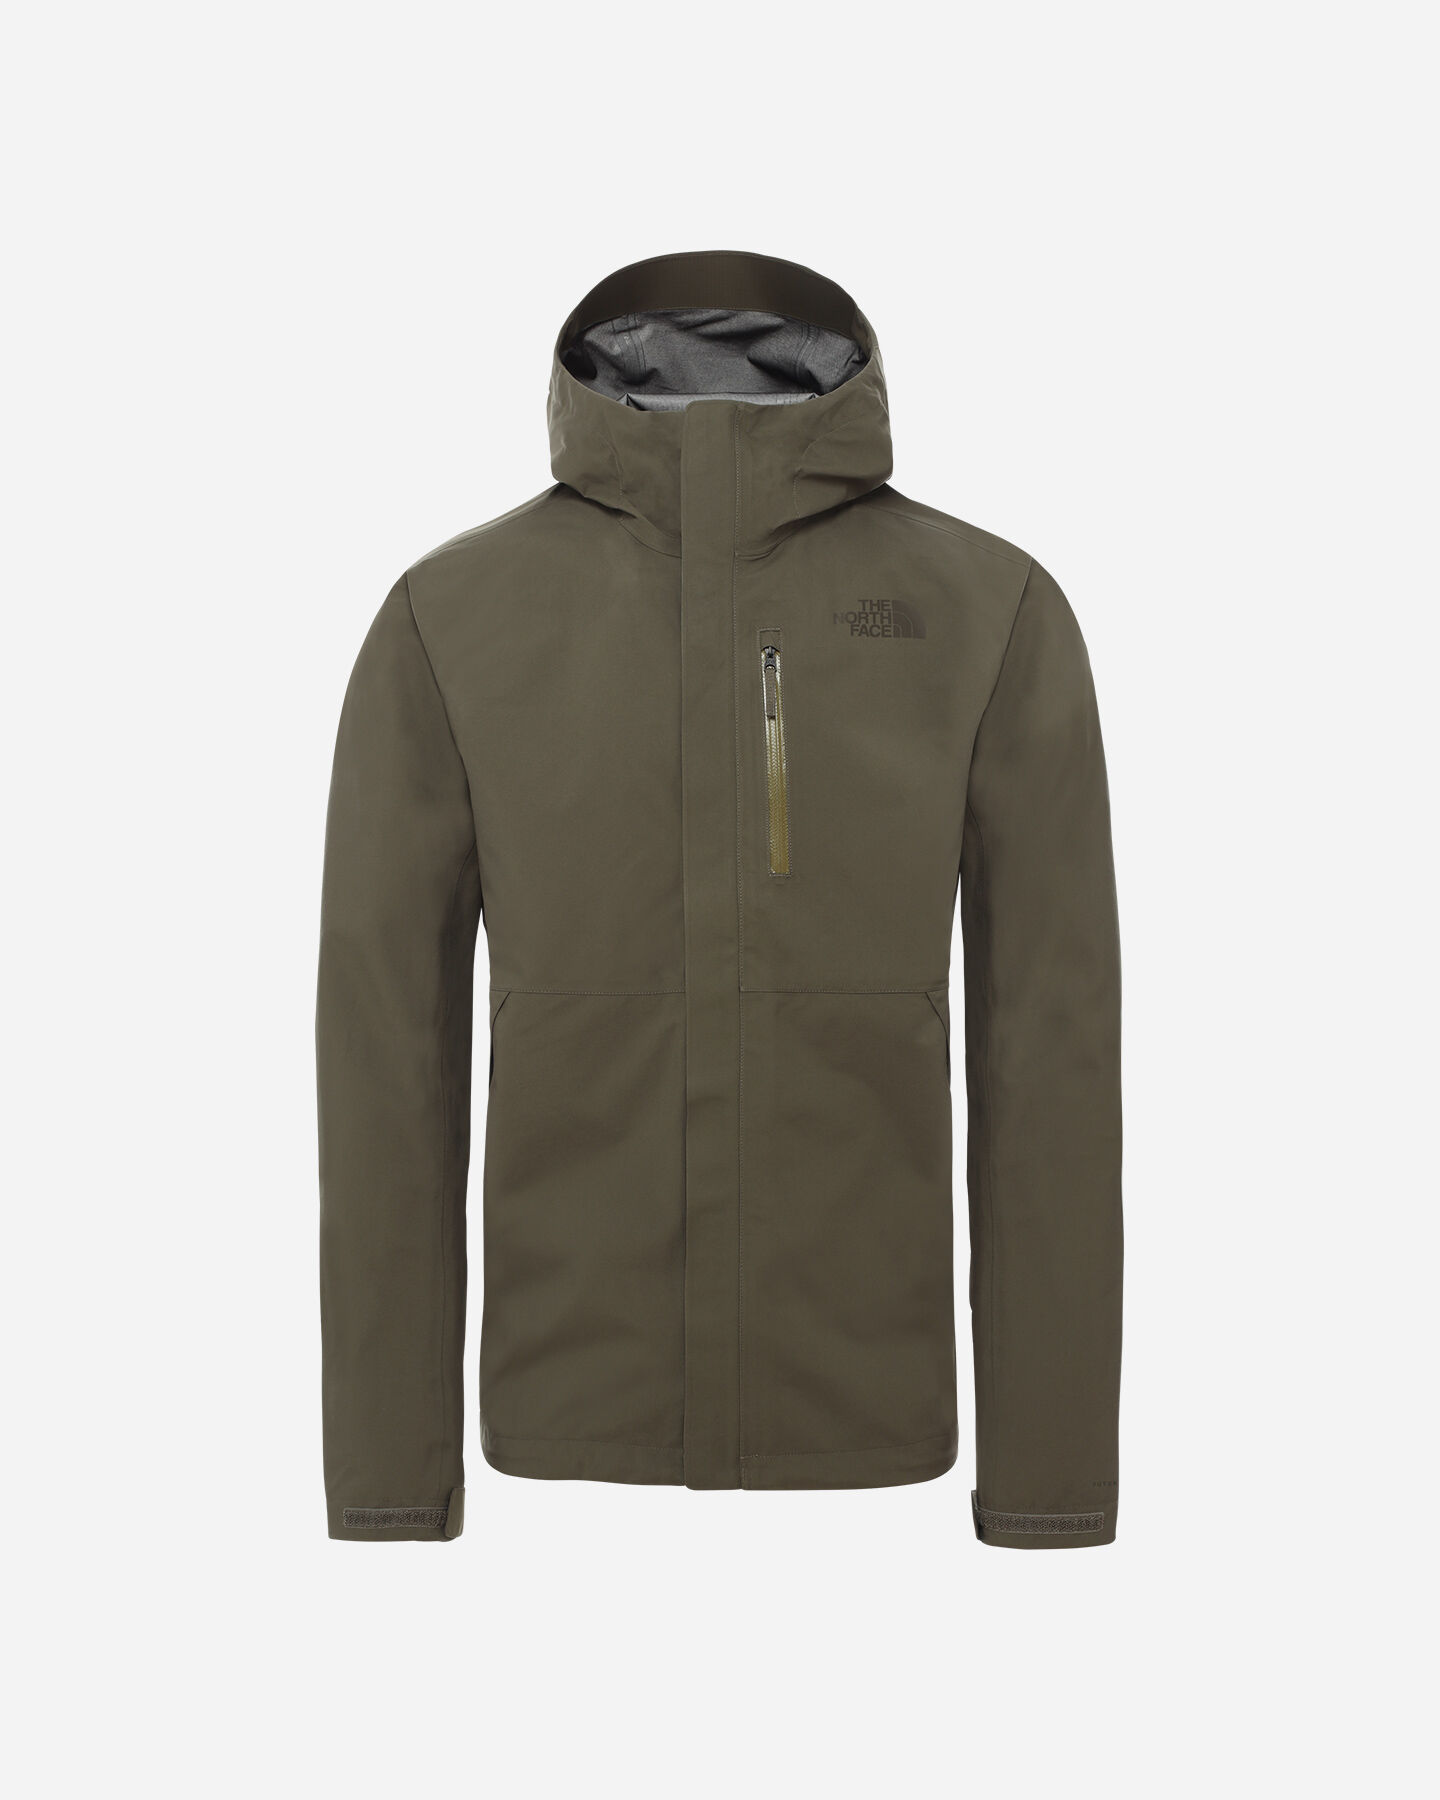  Giacca outdoor THE NORTH FACE DRYZZLE FUTURELIGHT M S5184179|21L|XS scatto 0